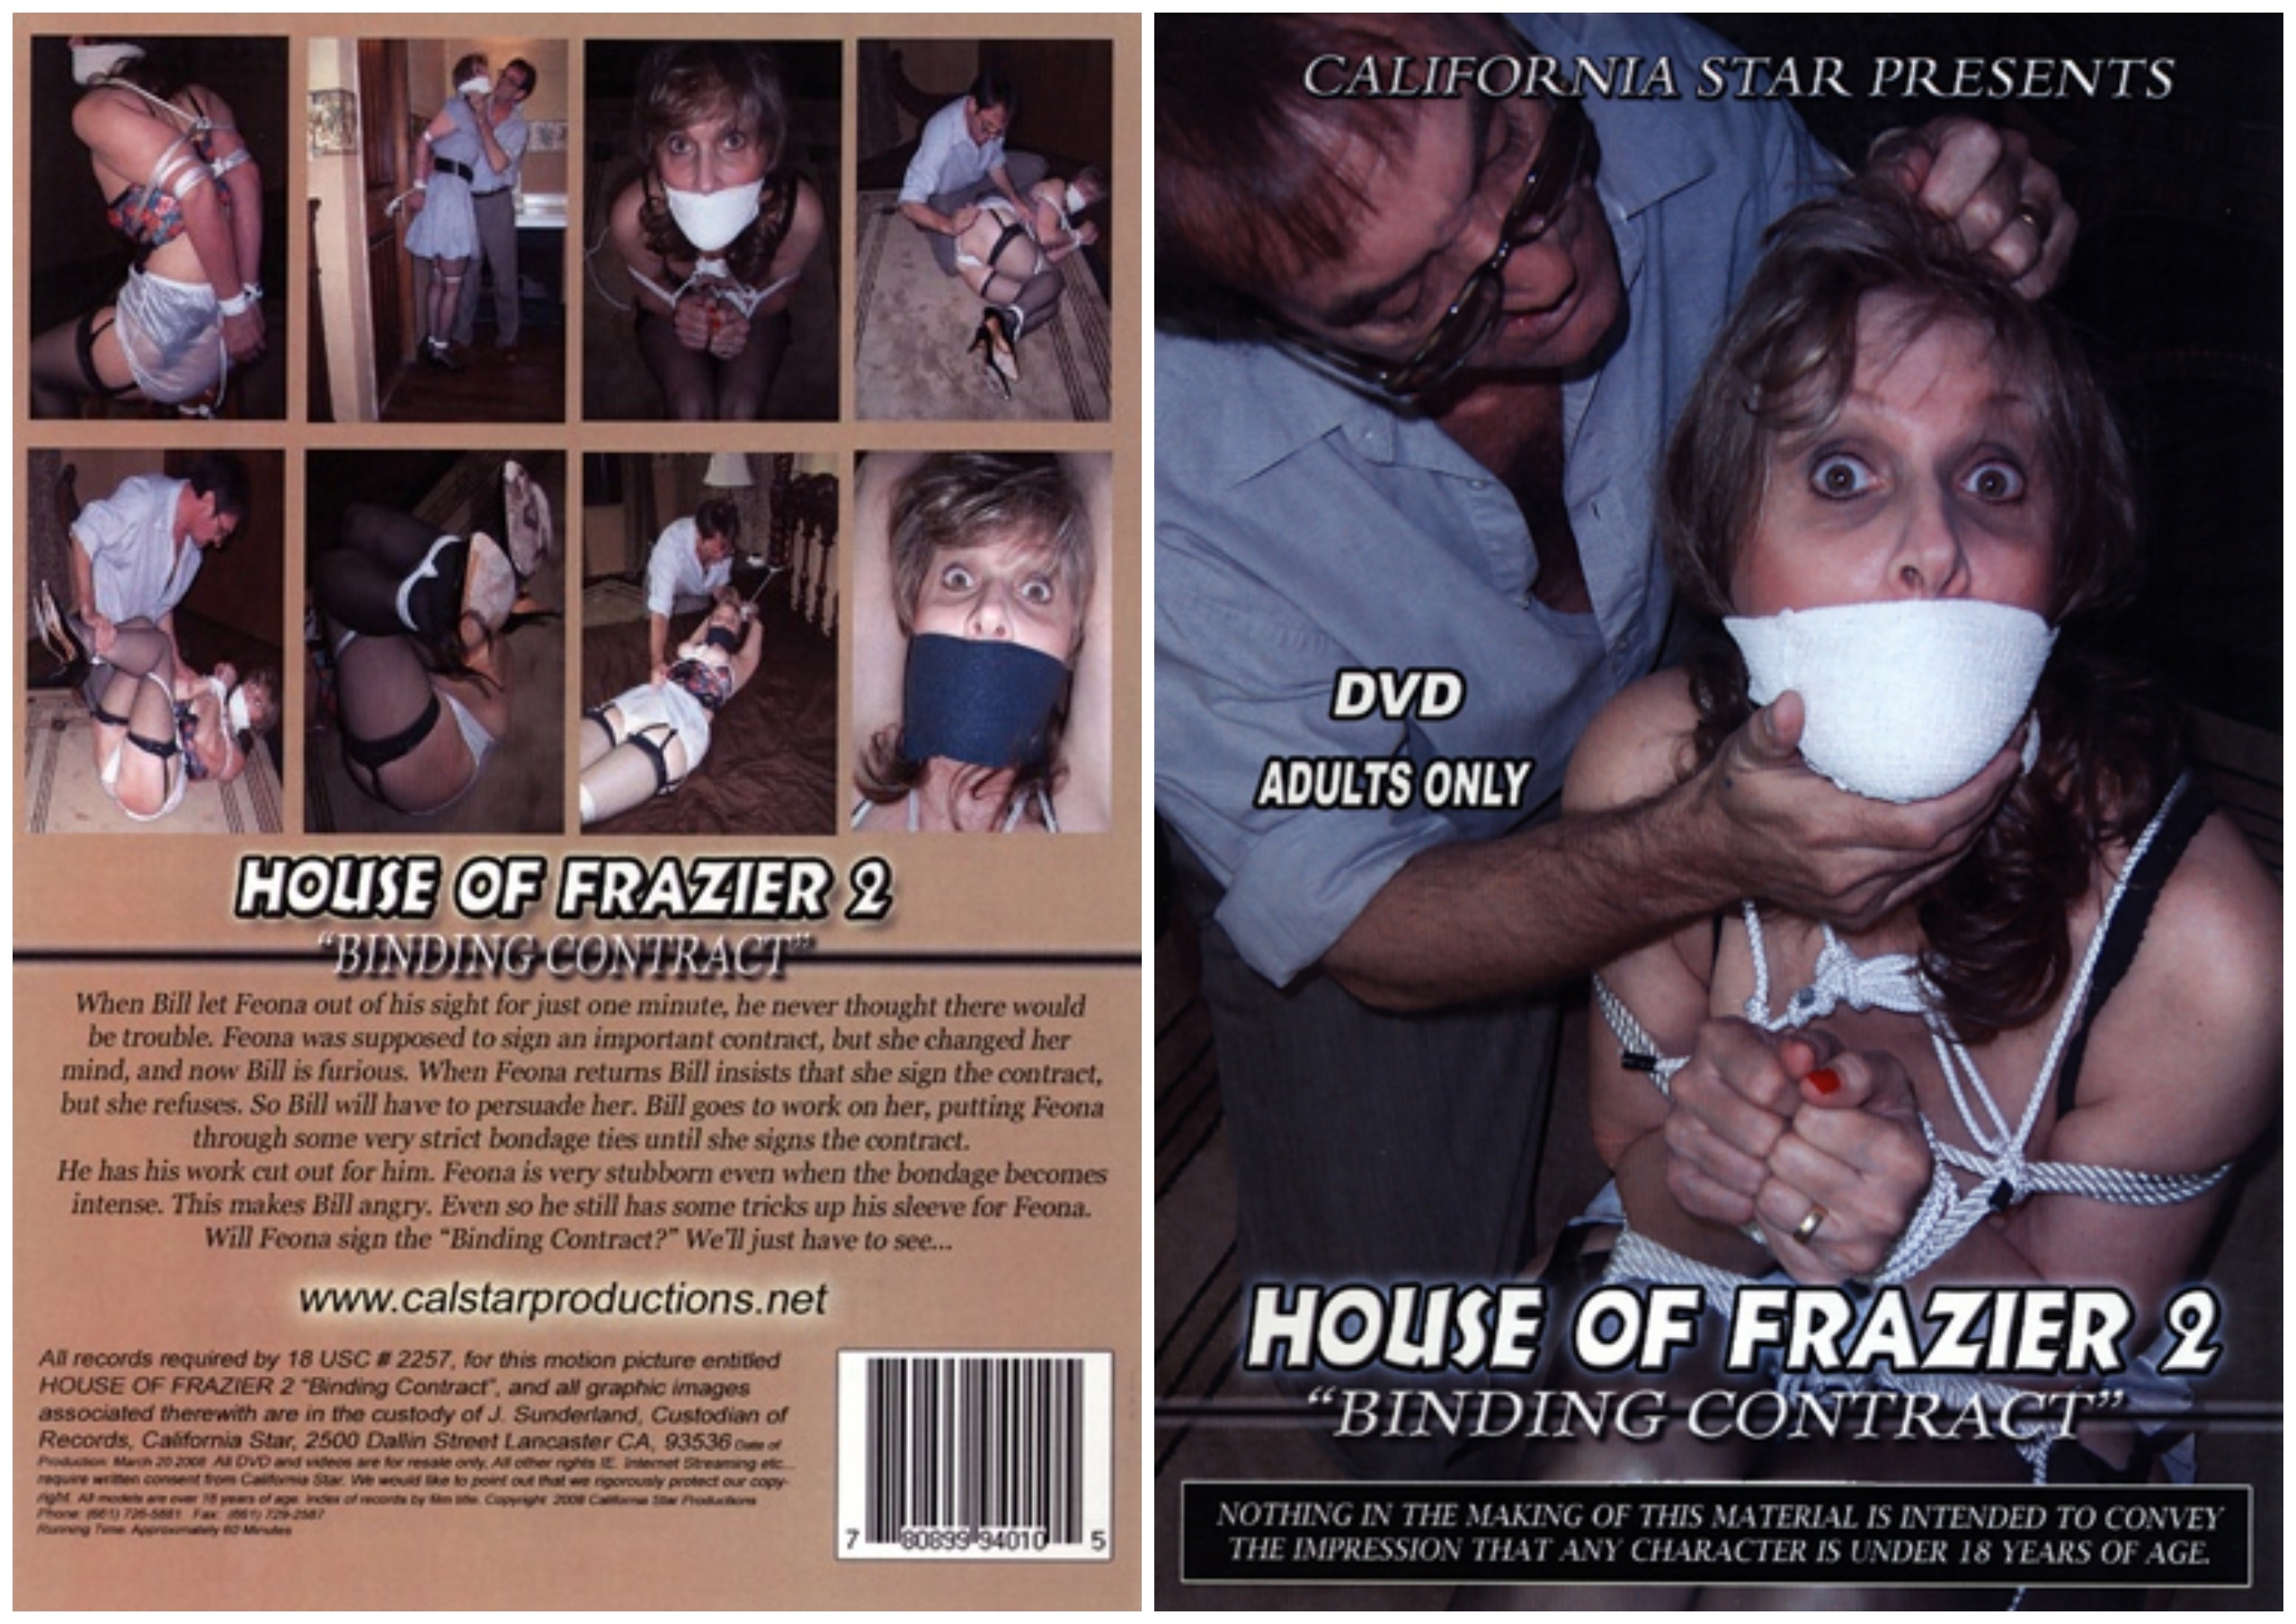 House Of Frazier #2 - Binding Contract [2007, Calstar, BDSM, Male Domination, Fetish, DVDRip]